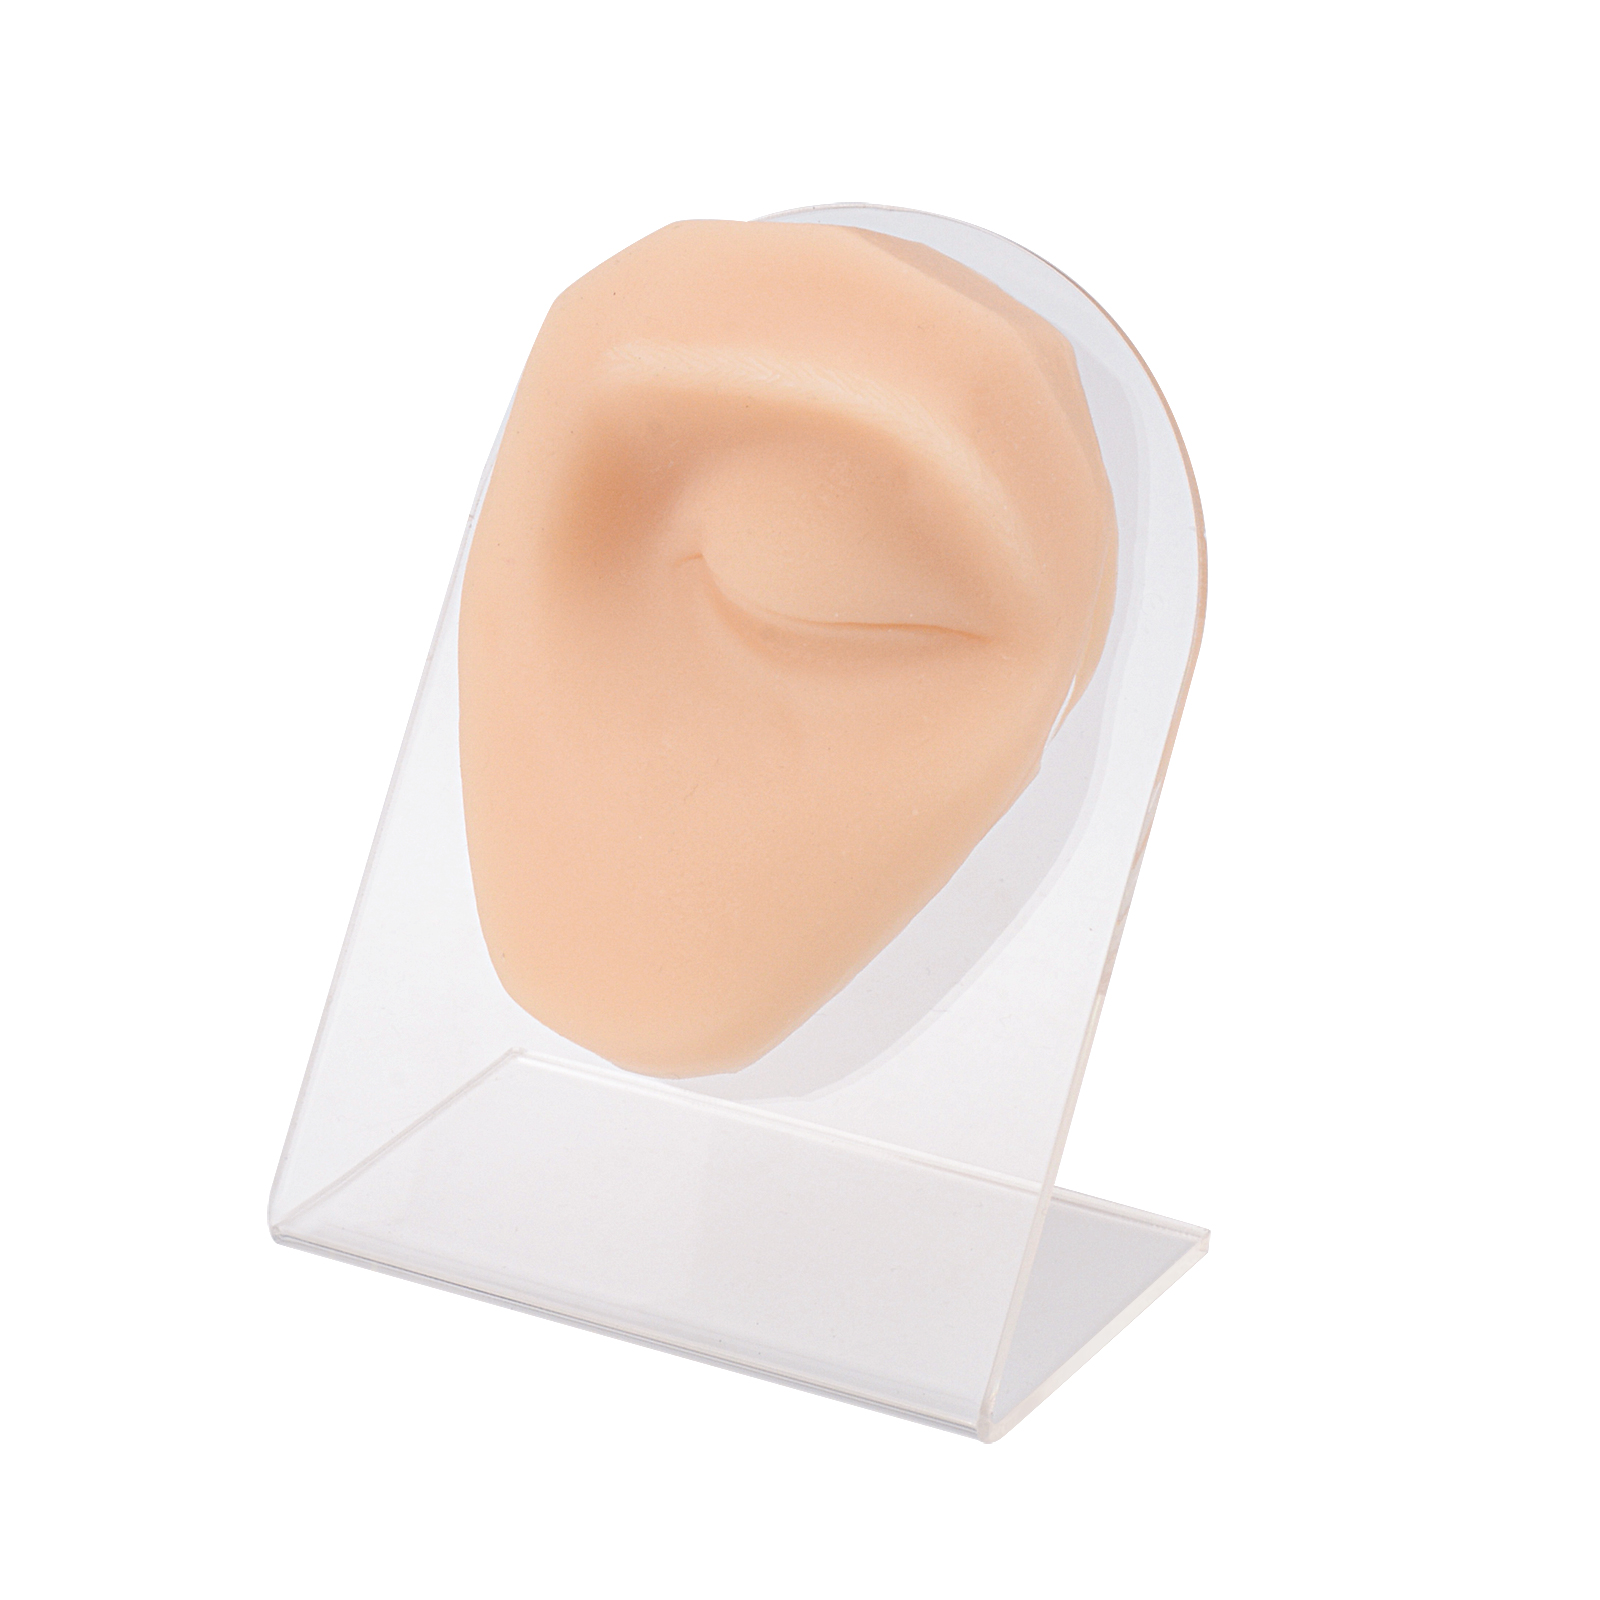 SimCoach Soft Silicone Piercing Model with Acrylic Stand, Piercing Practice  Body Parts – SimCoach